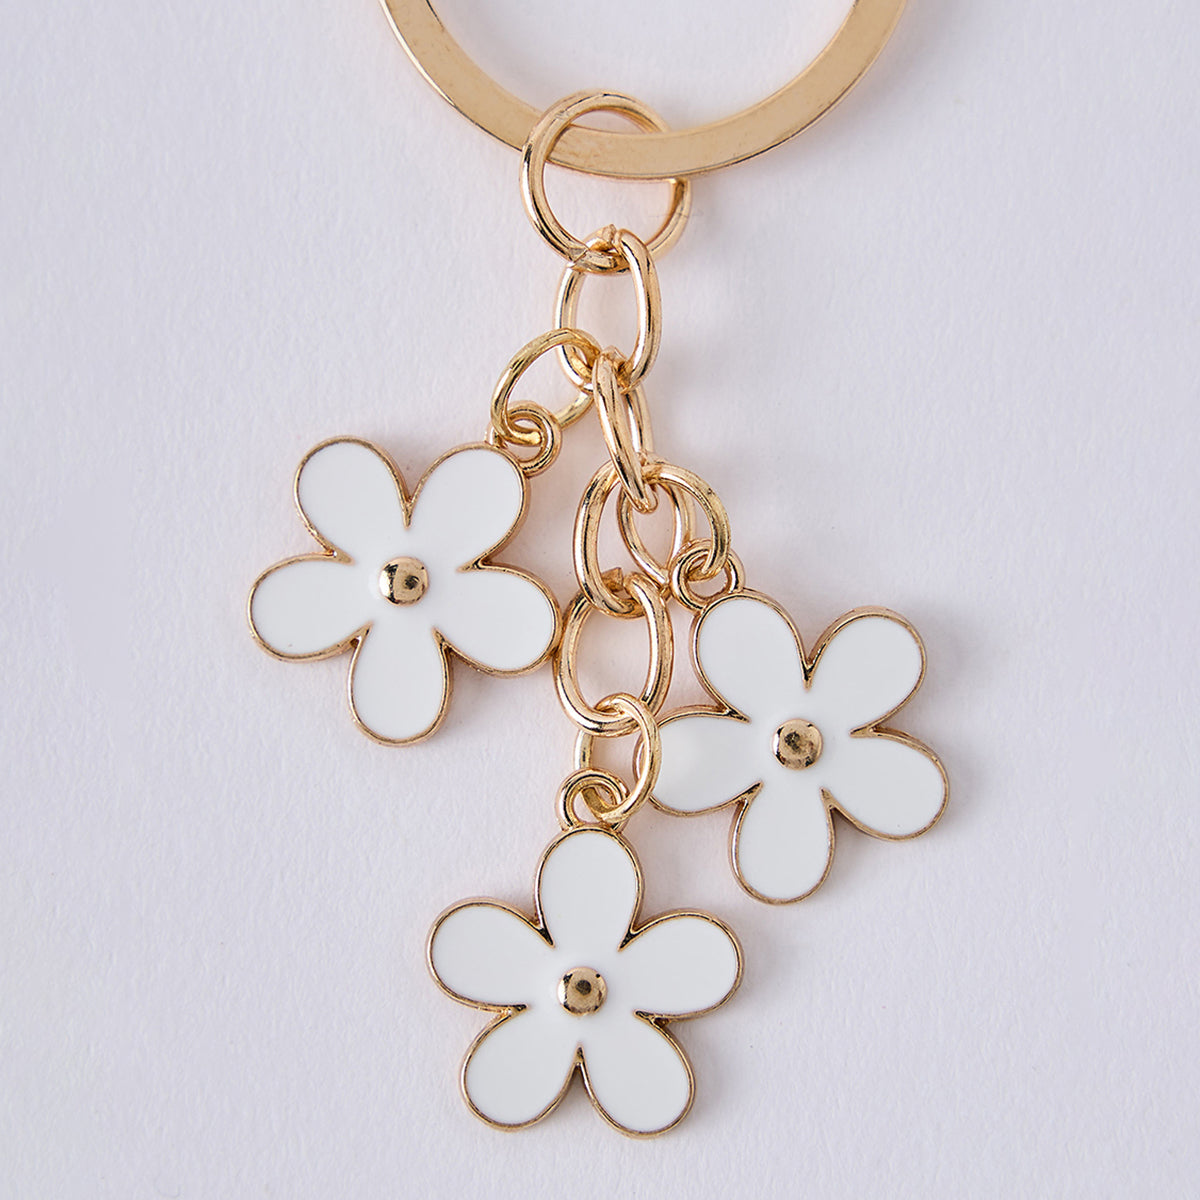 Gold Plated White Flower Power Keychain